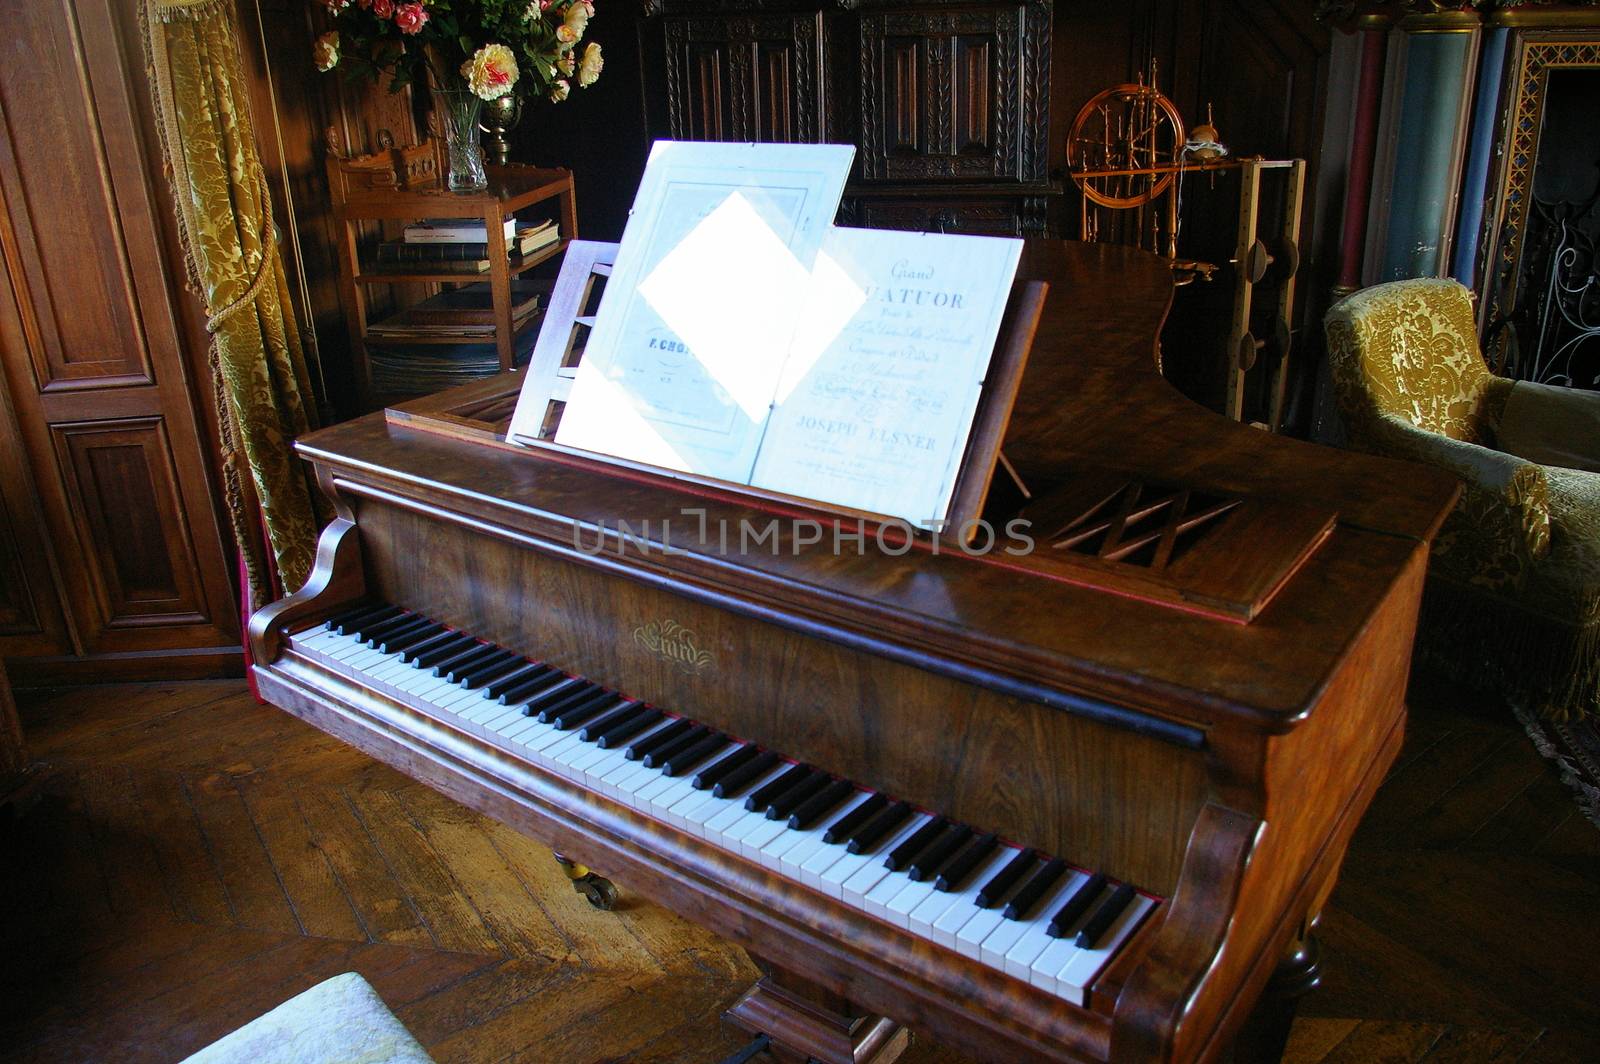 Antique piano in a room with period furniture by flaneur9